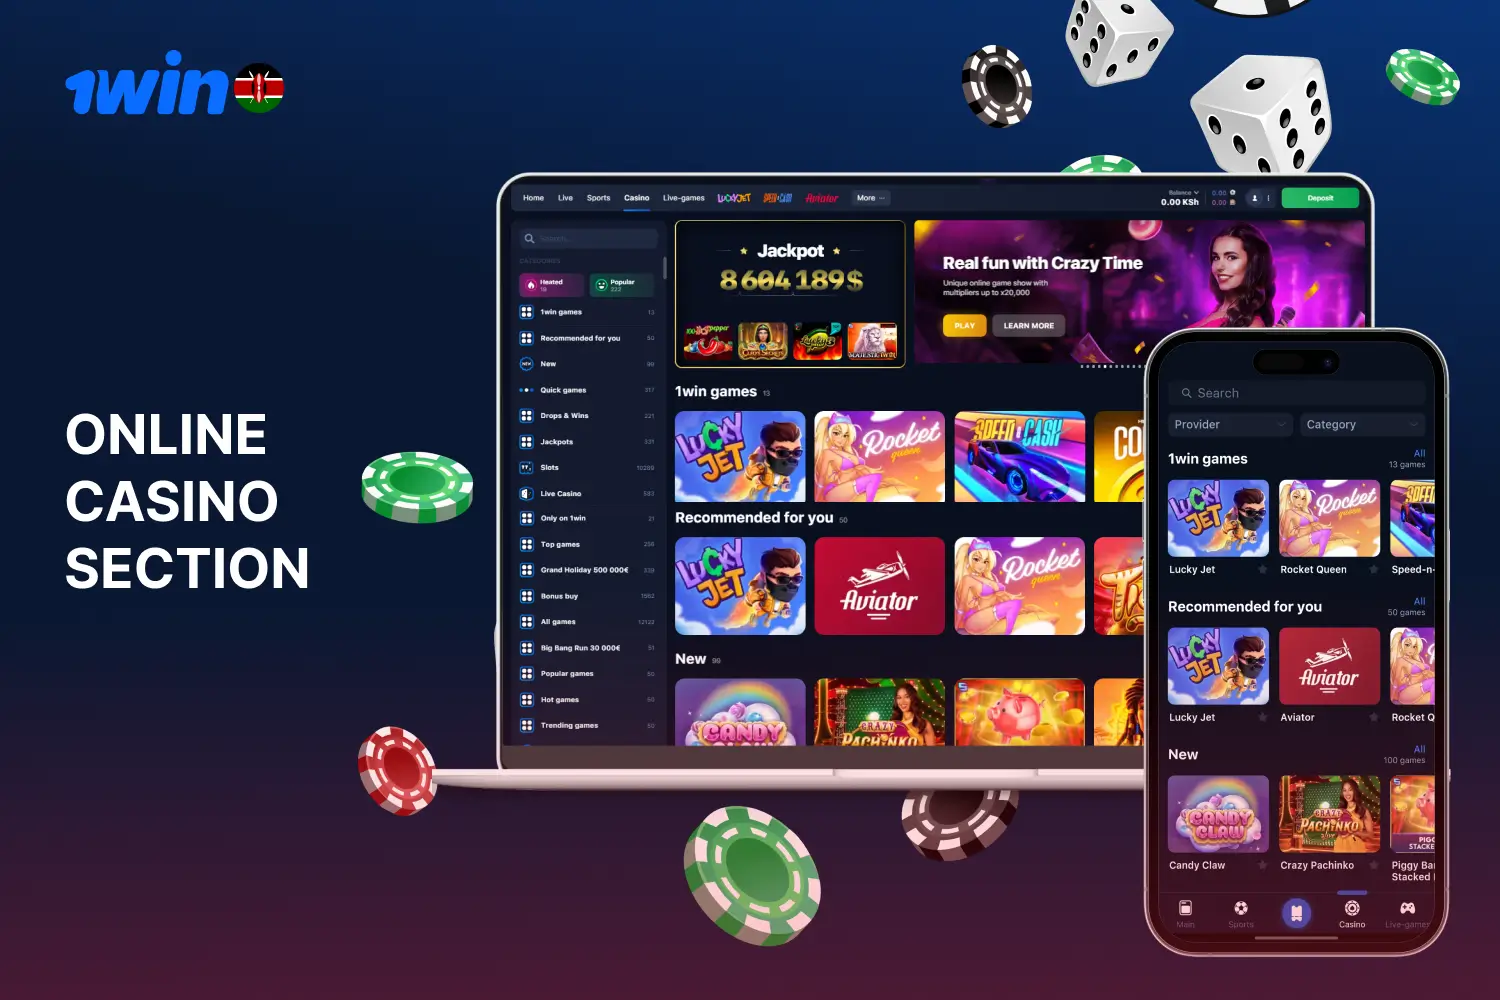 Gamblers from Kenya can play a variety of online casino games at 1win